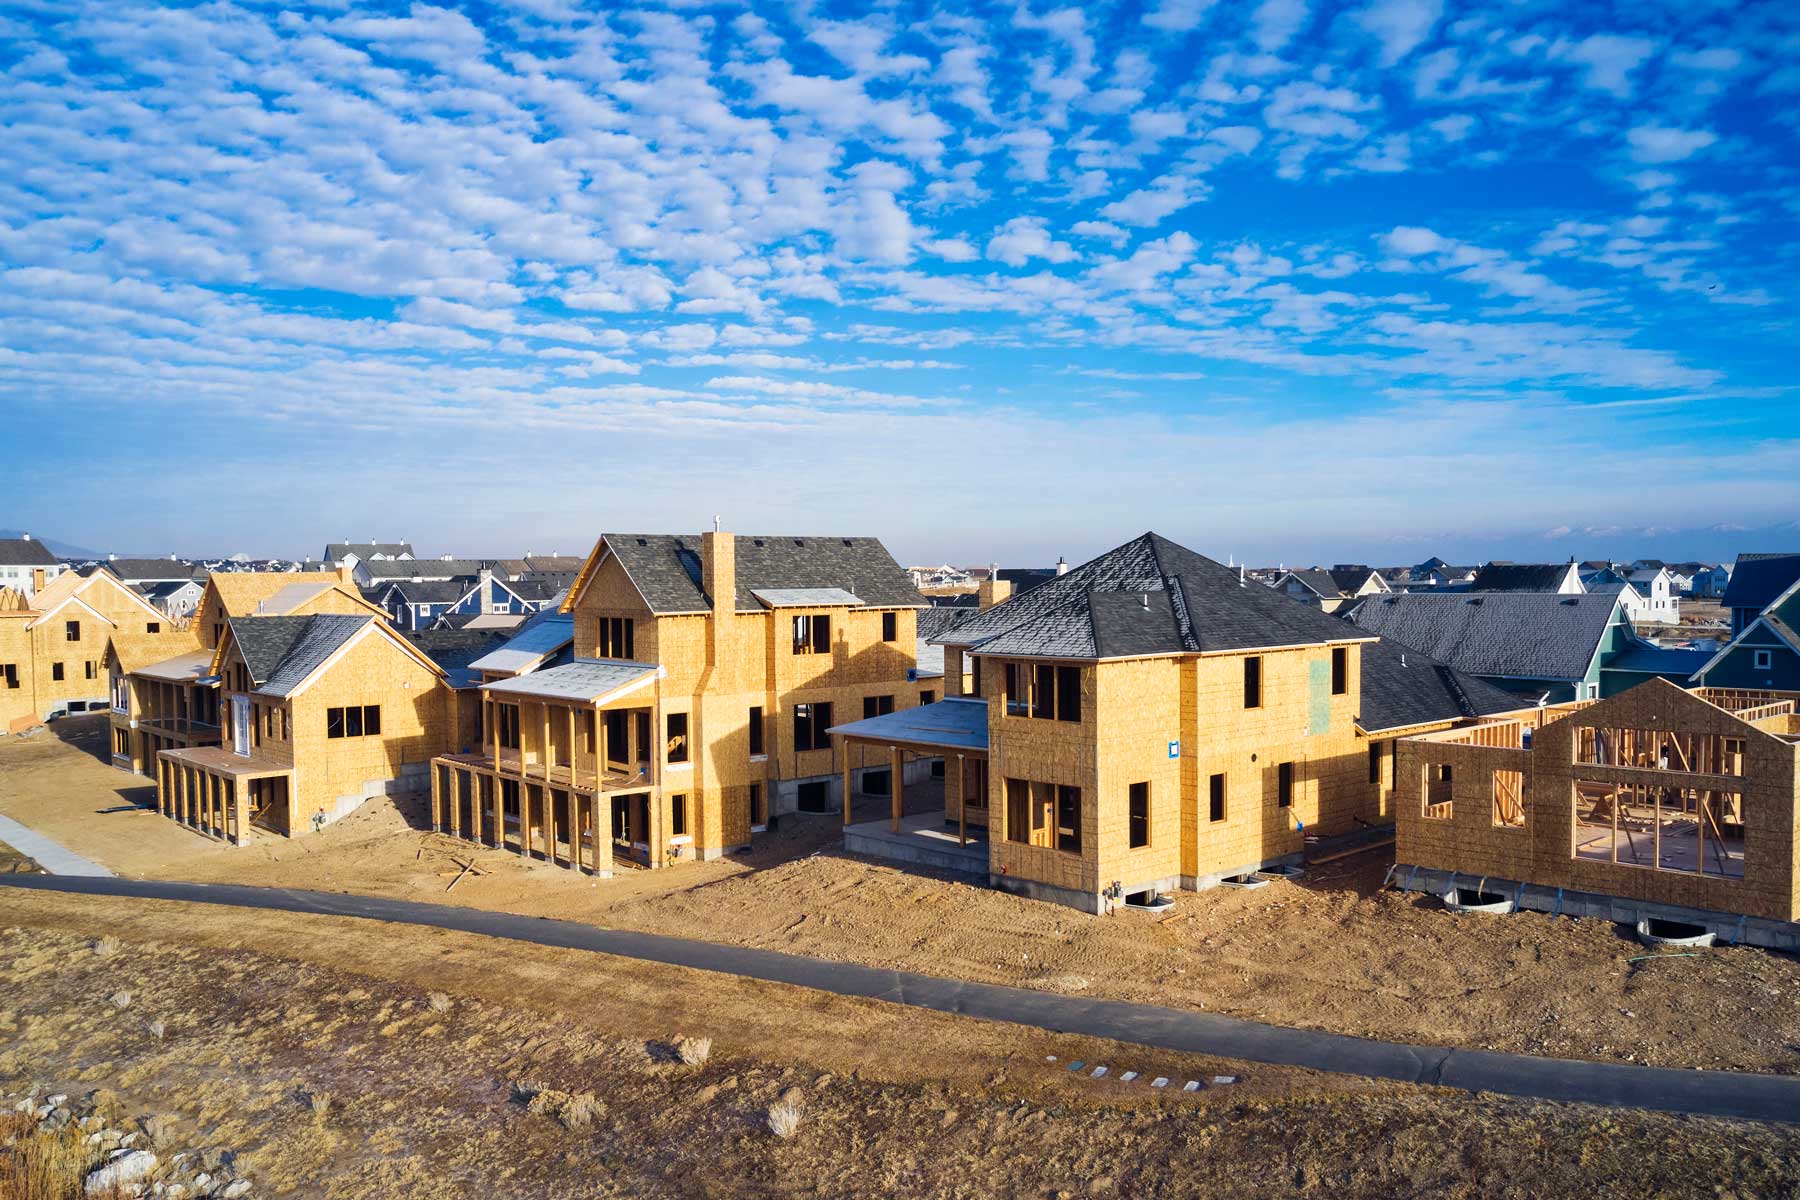 New Houses Under Construction Istock 1365422206 